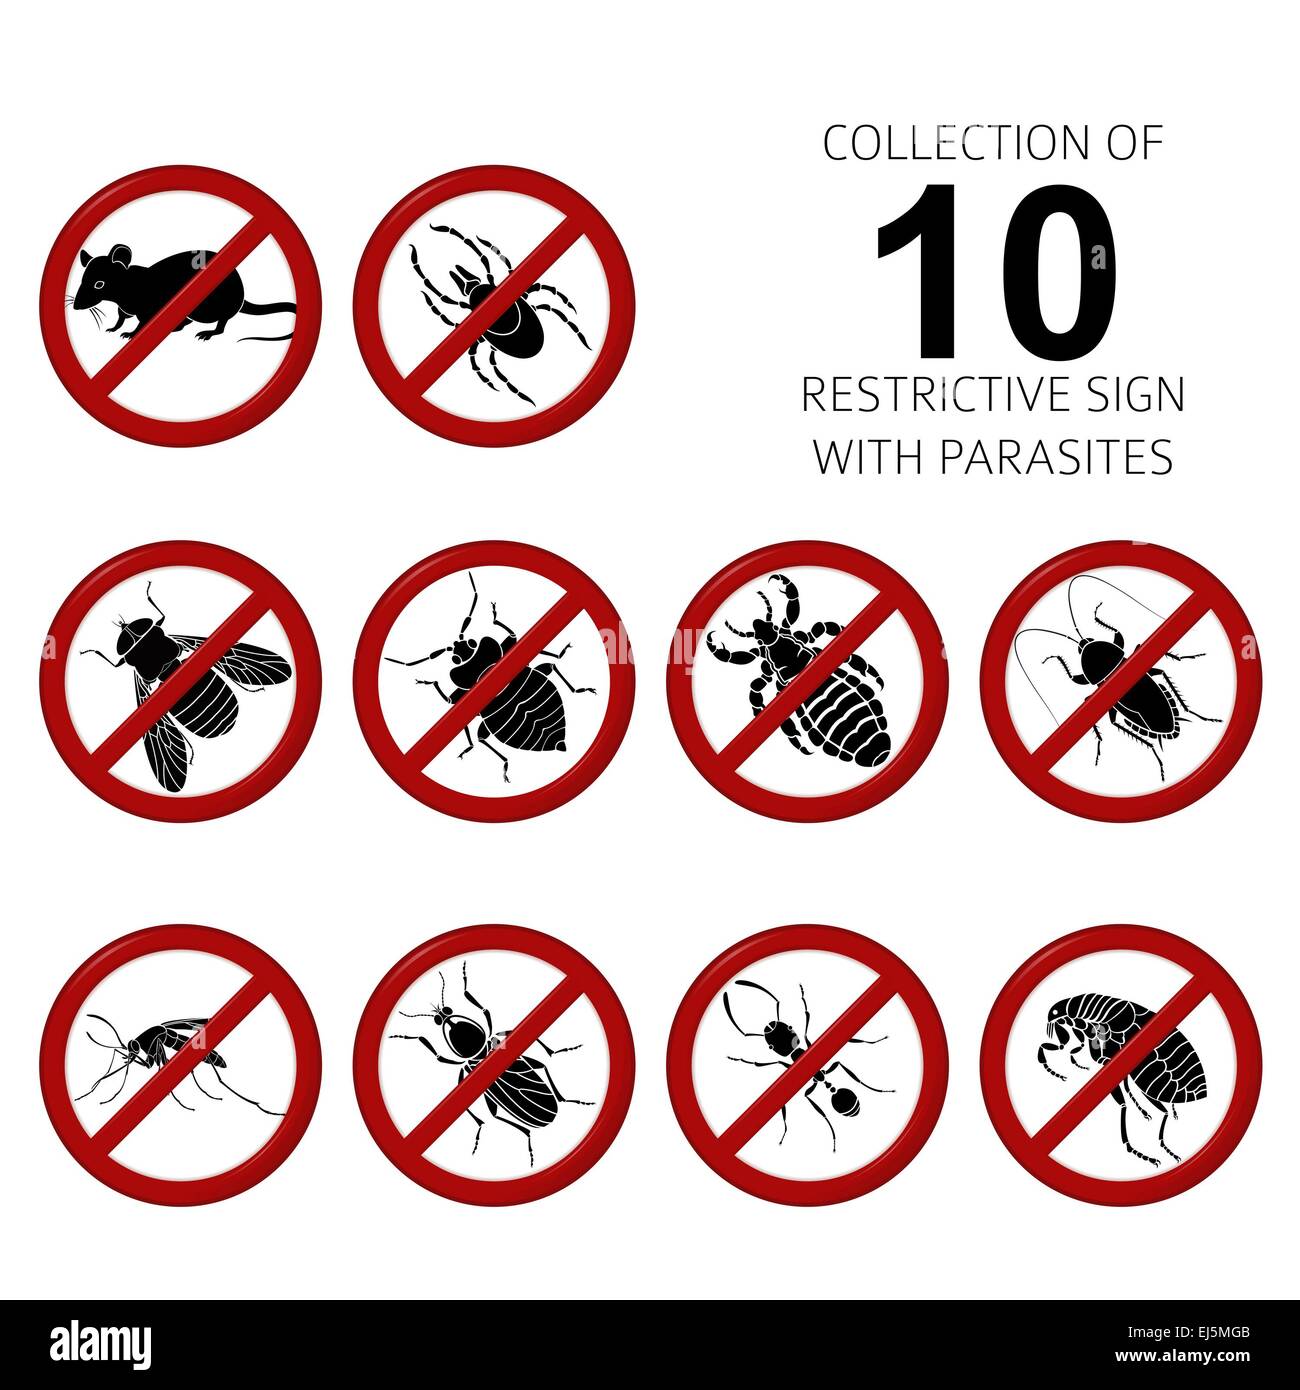 Vector Collection of image of 10 parasites Stock Photo